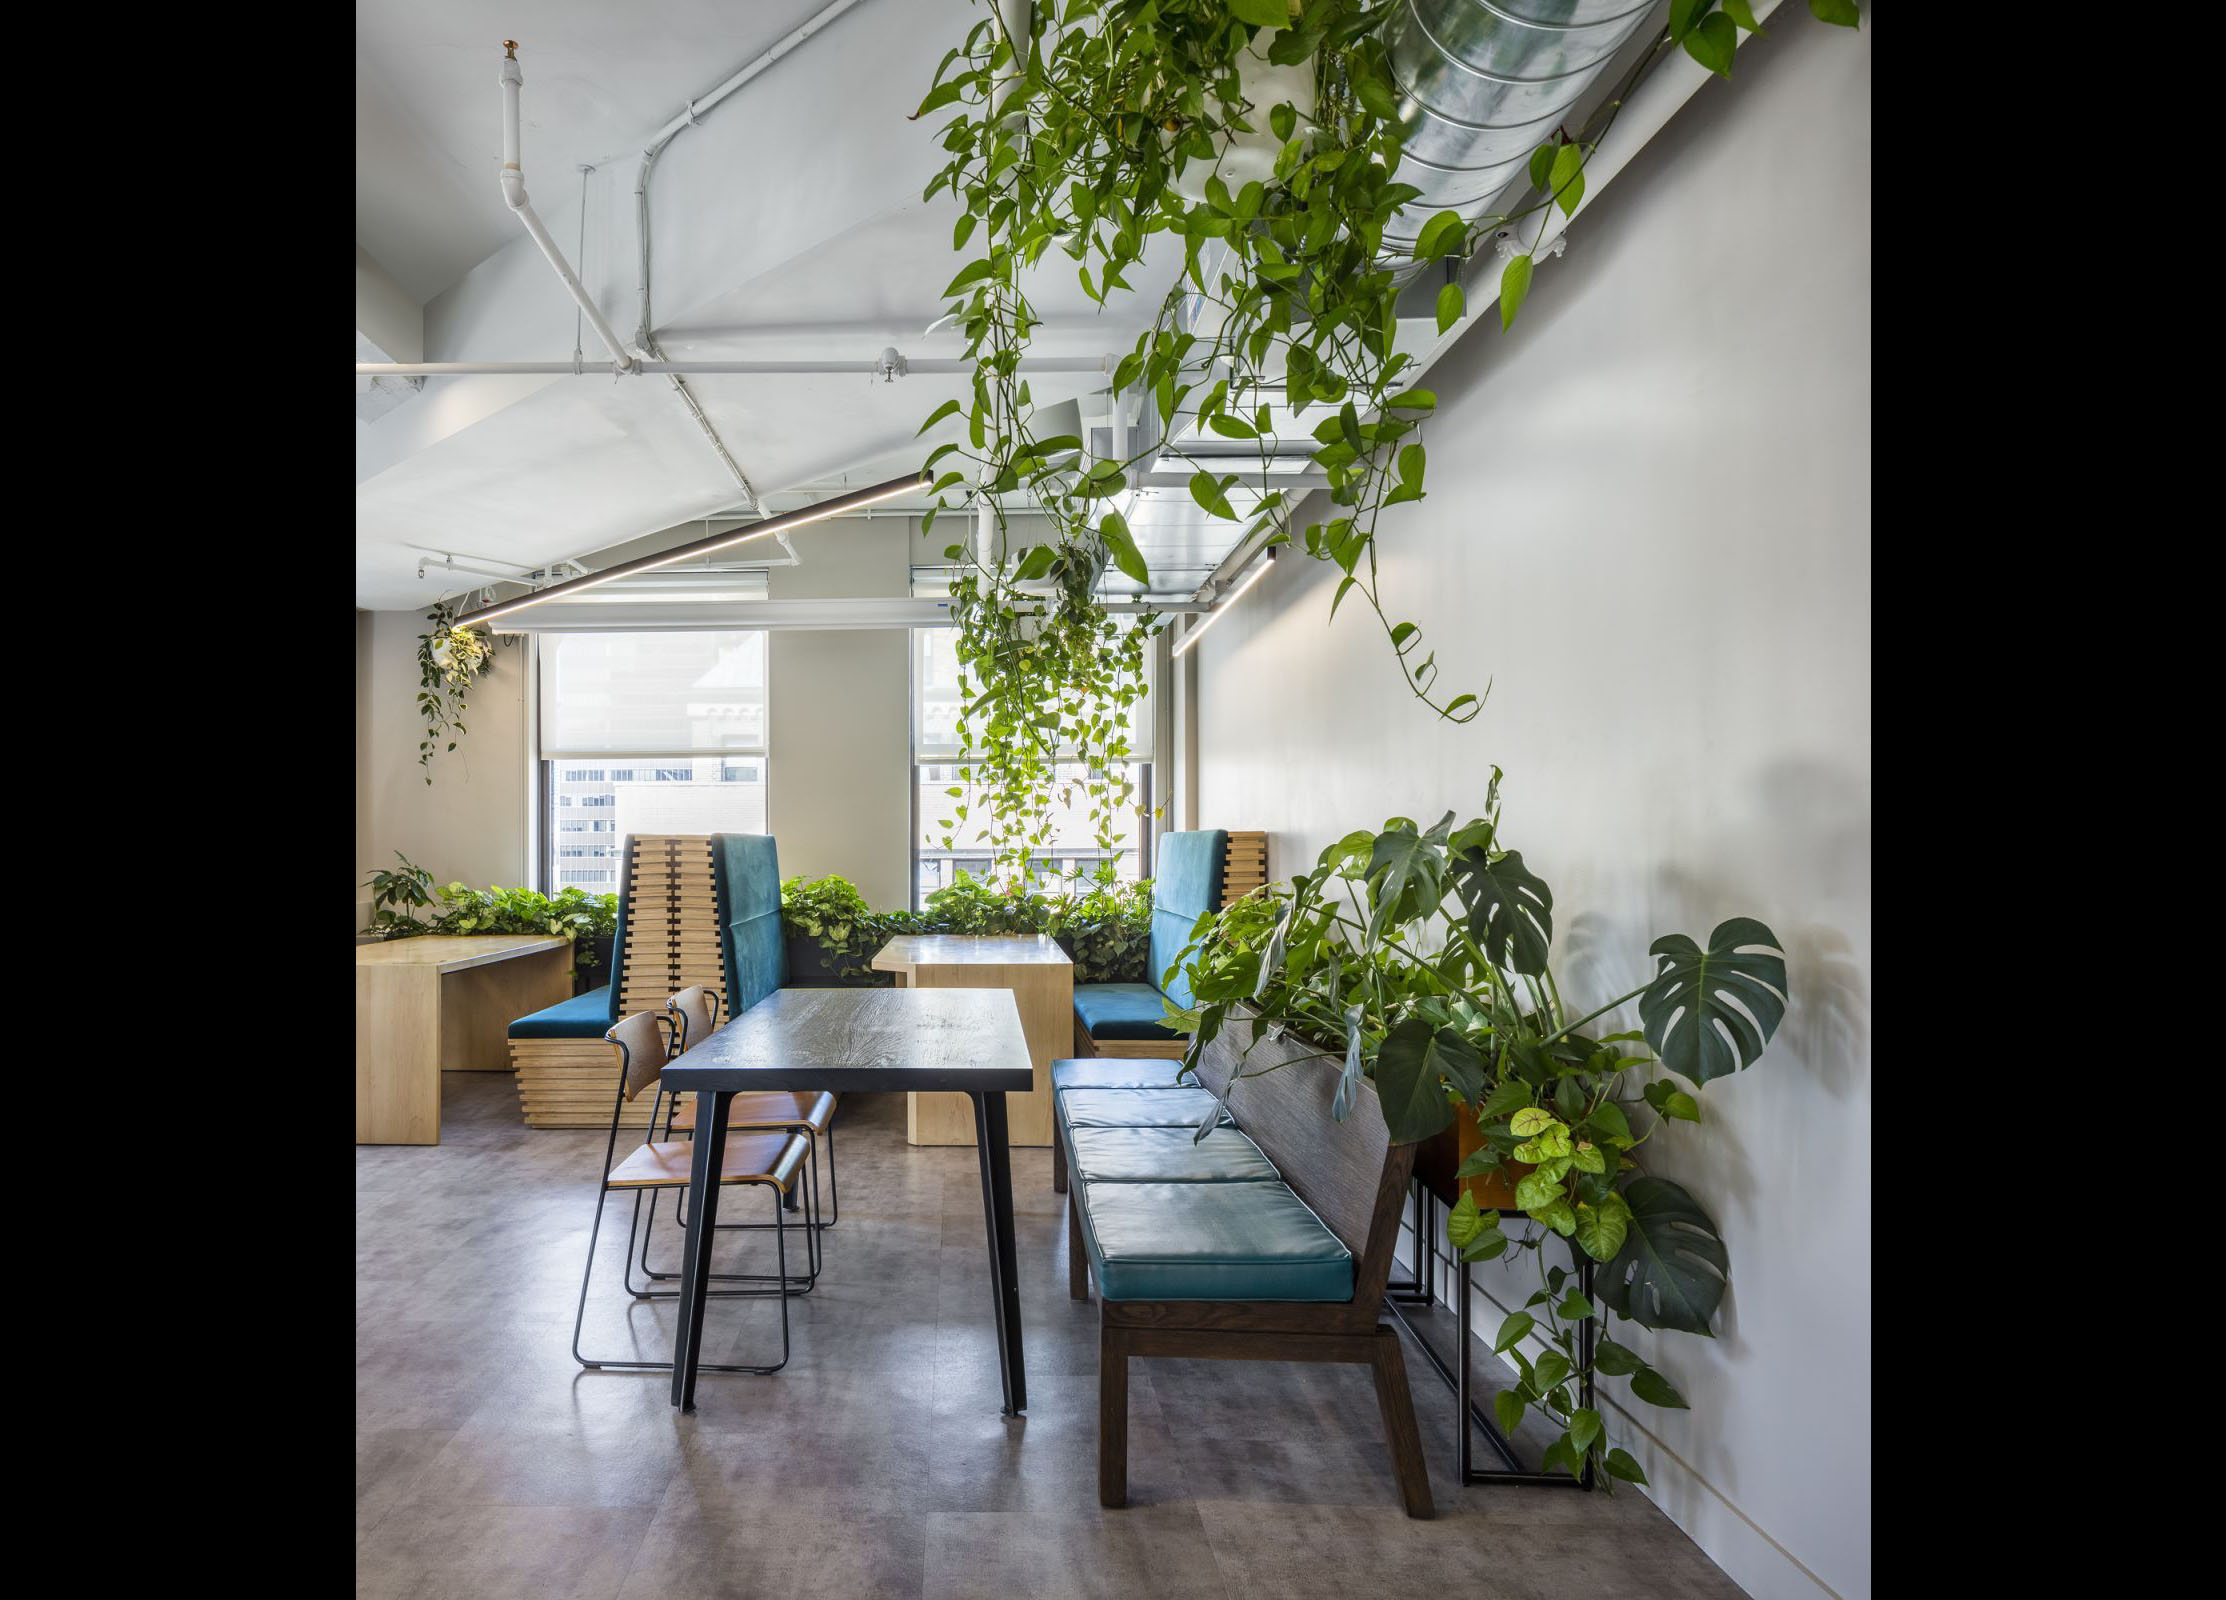 NYC Office Plant Services